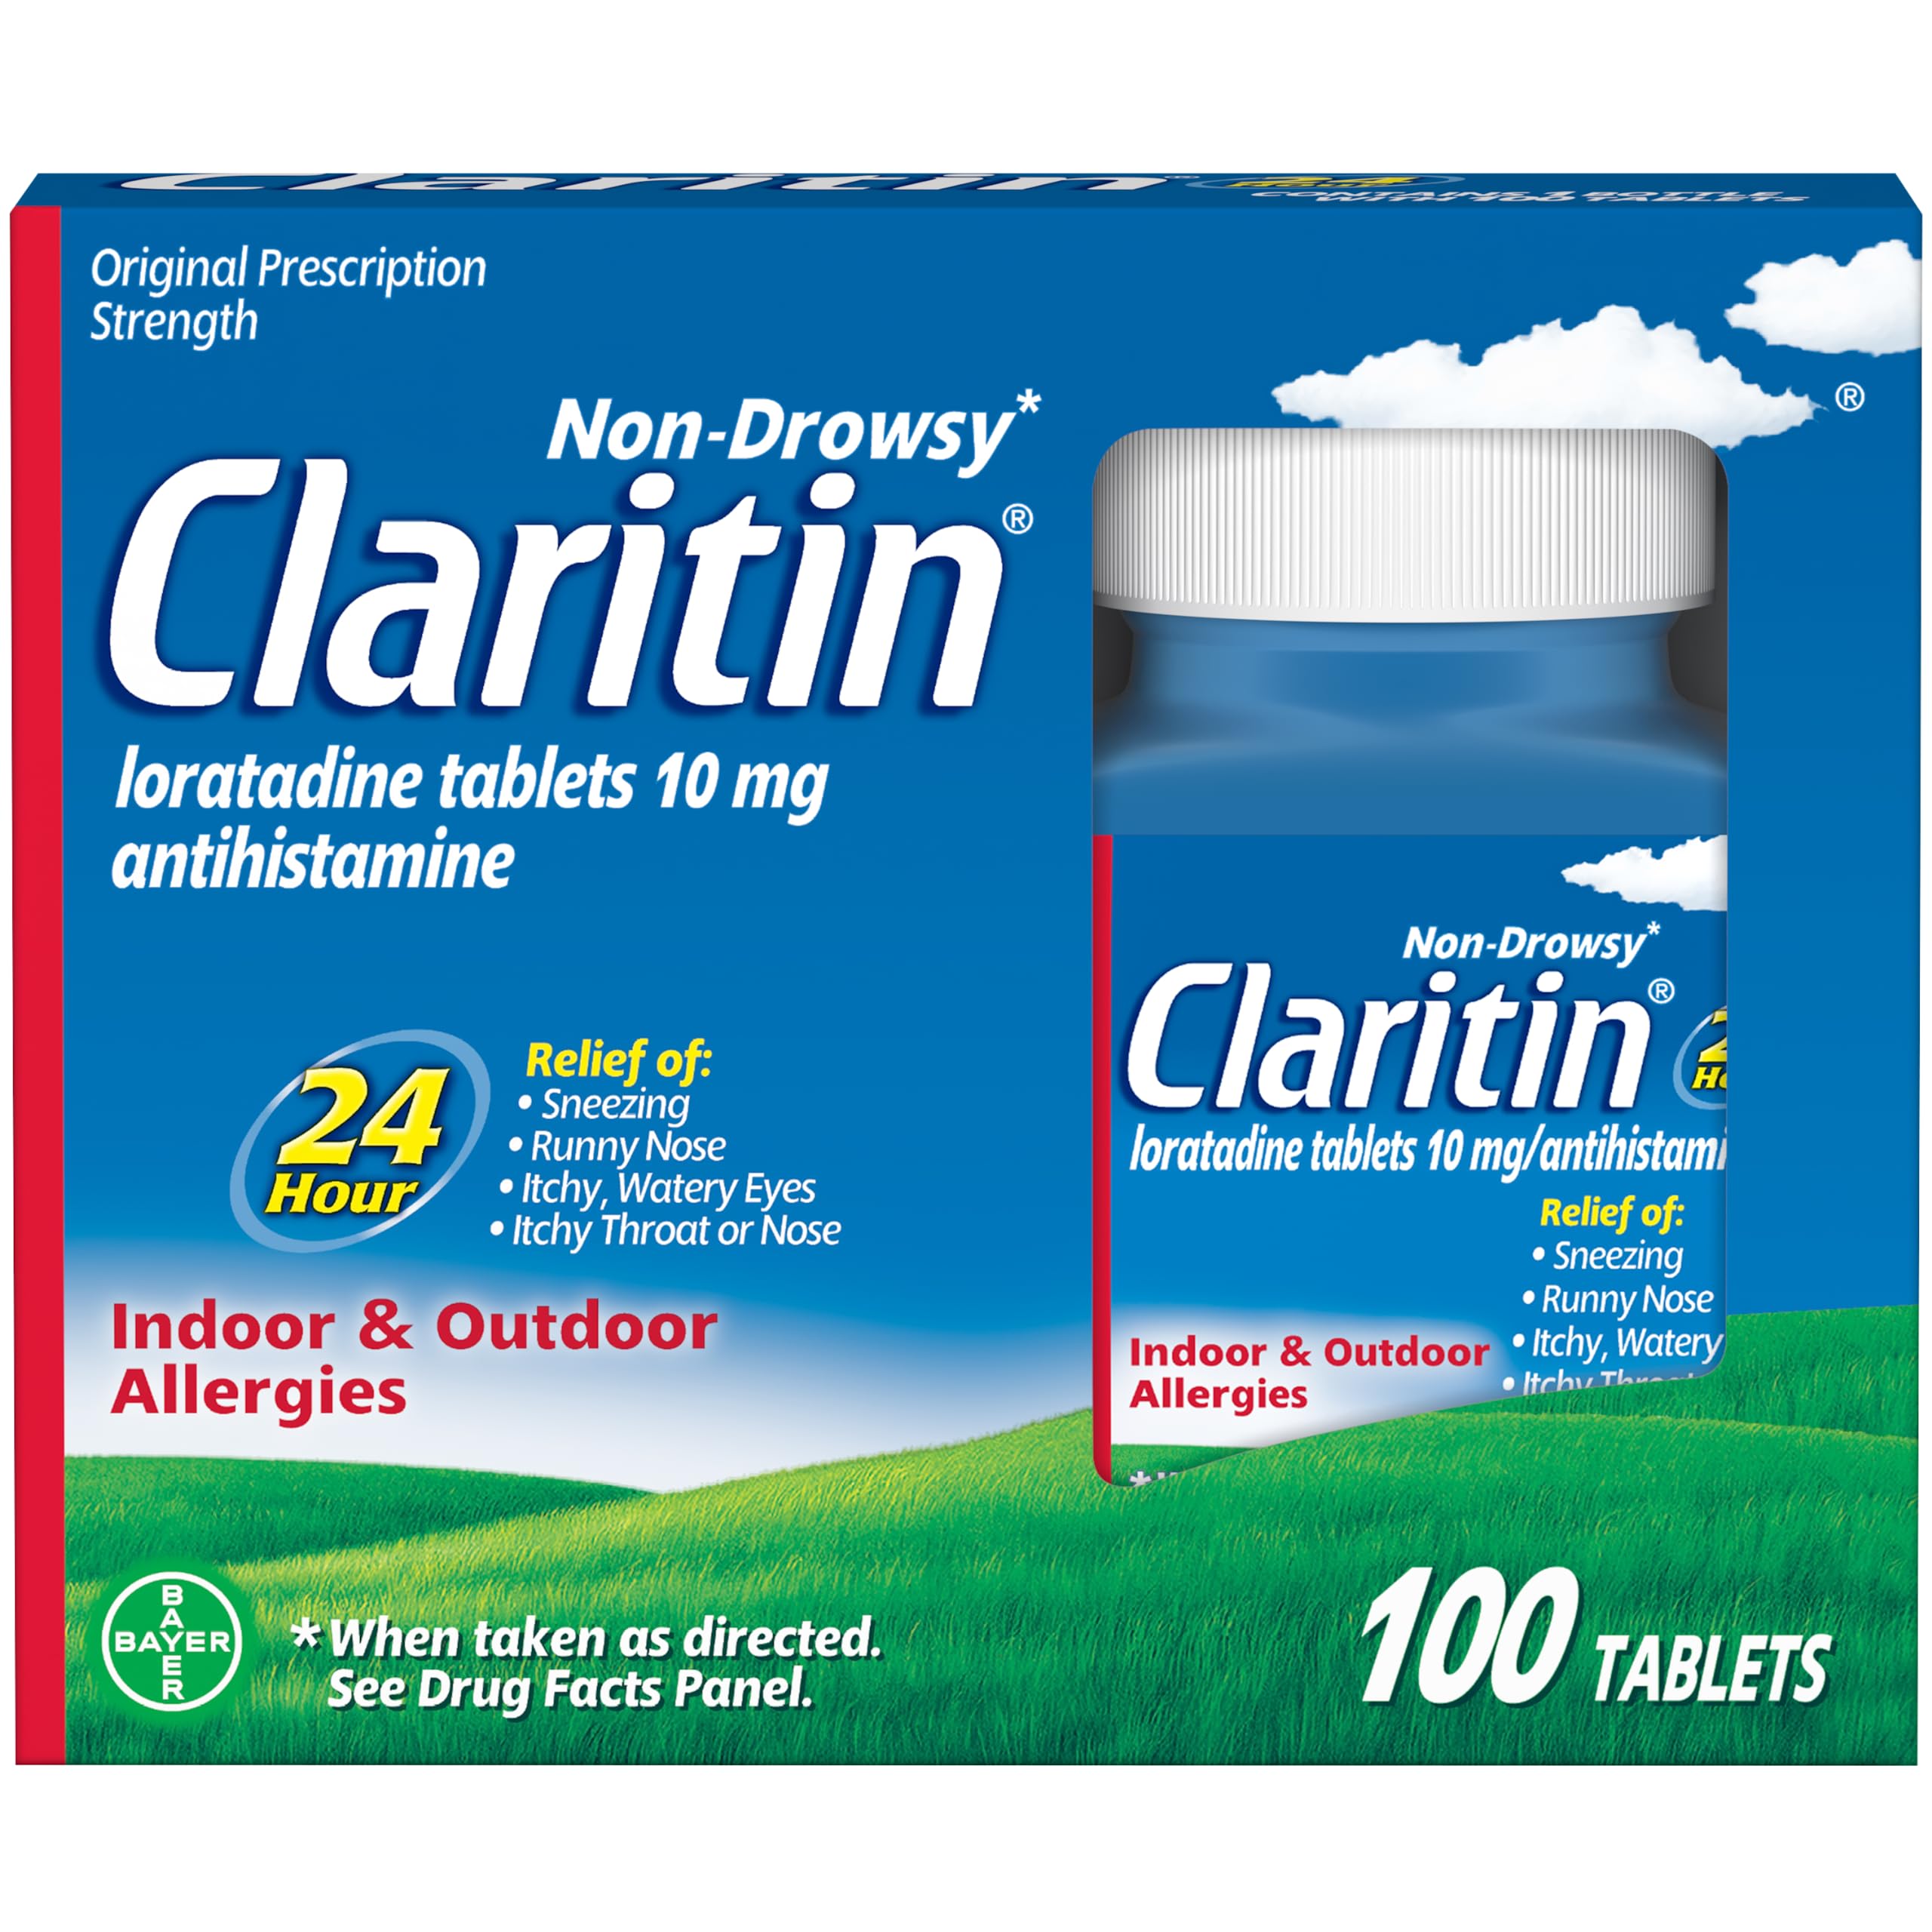 Claritin 24 Hour Allergy Medicine, Non-Drowsy Prescription Strength Allergy Relief, Loratadine Antihistamine Tablets For Over 200 Indoor and Outdoor Allergens, Adult Tablets, 100 Count (Pack of 1)